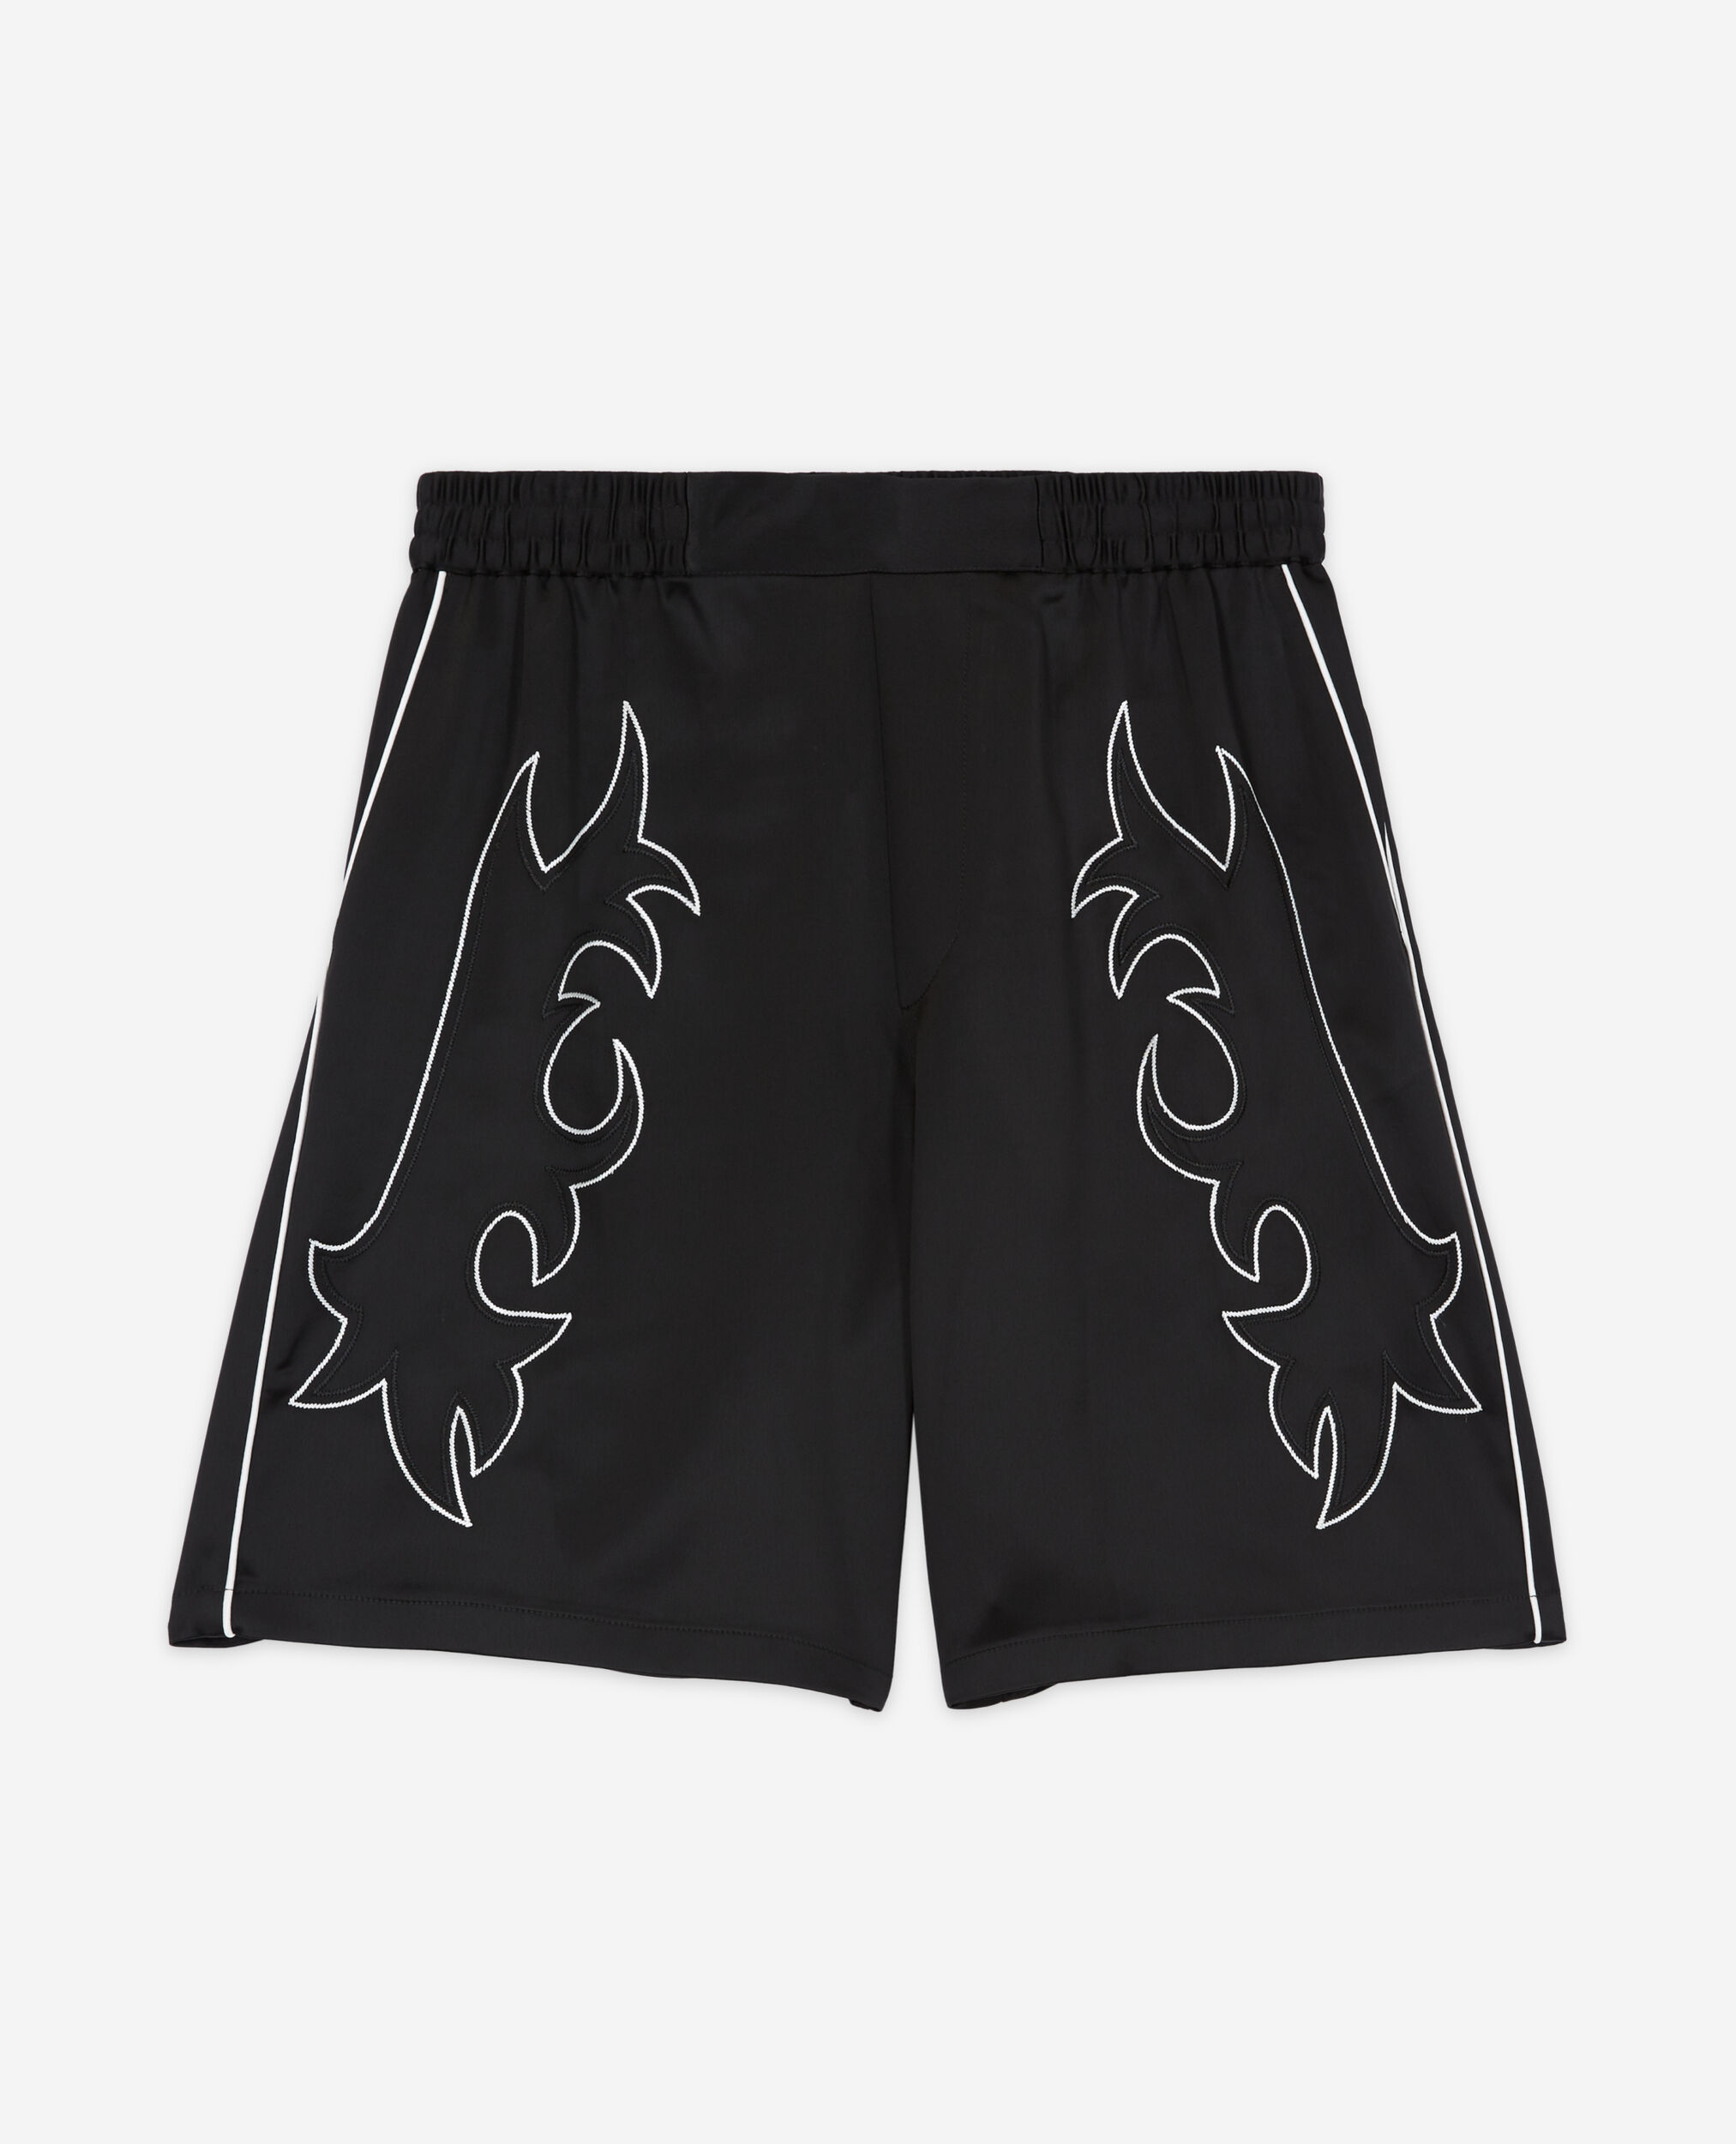 Black shorts with Western-style embroidery, BLACK, hi-res image number null